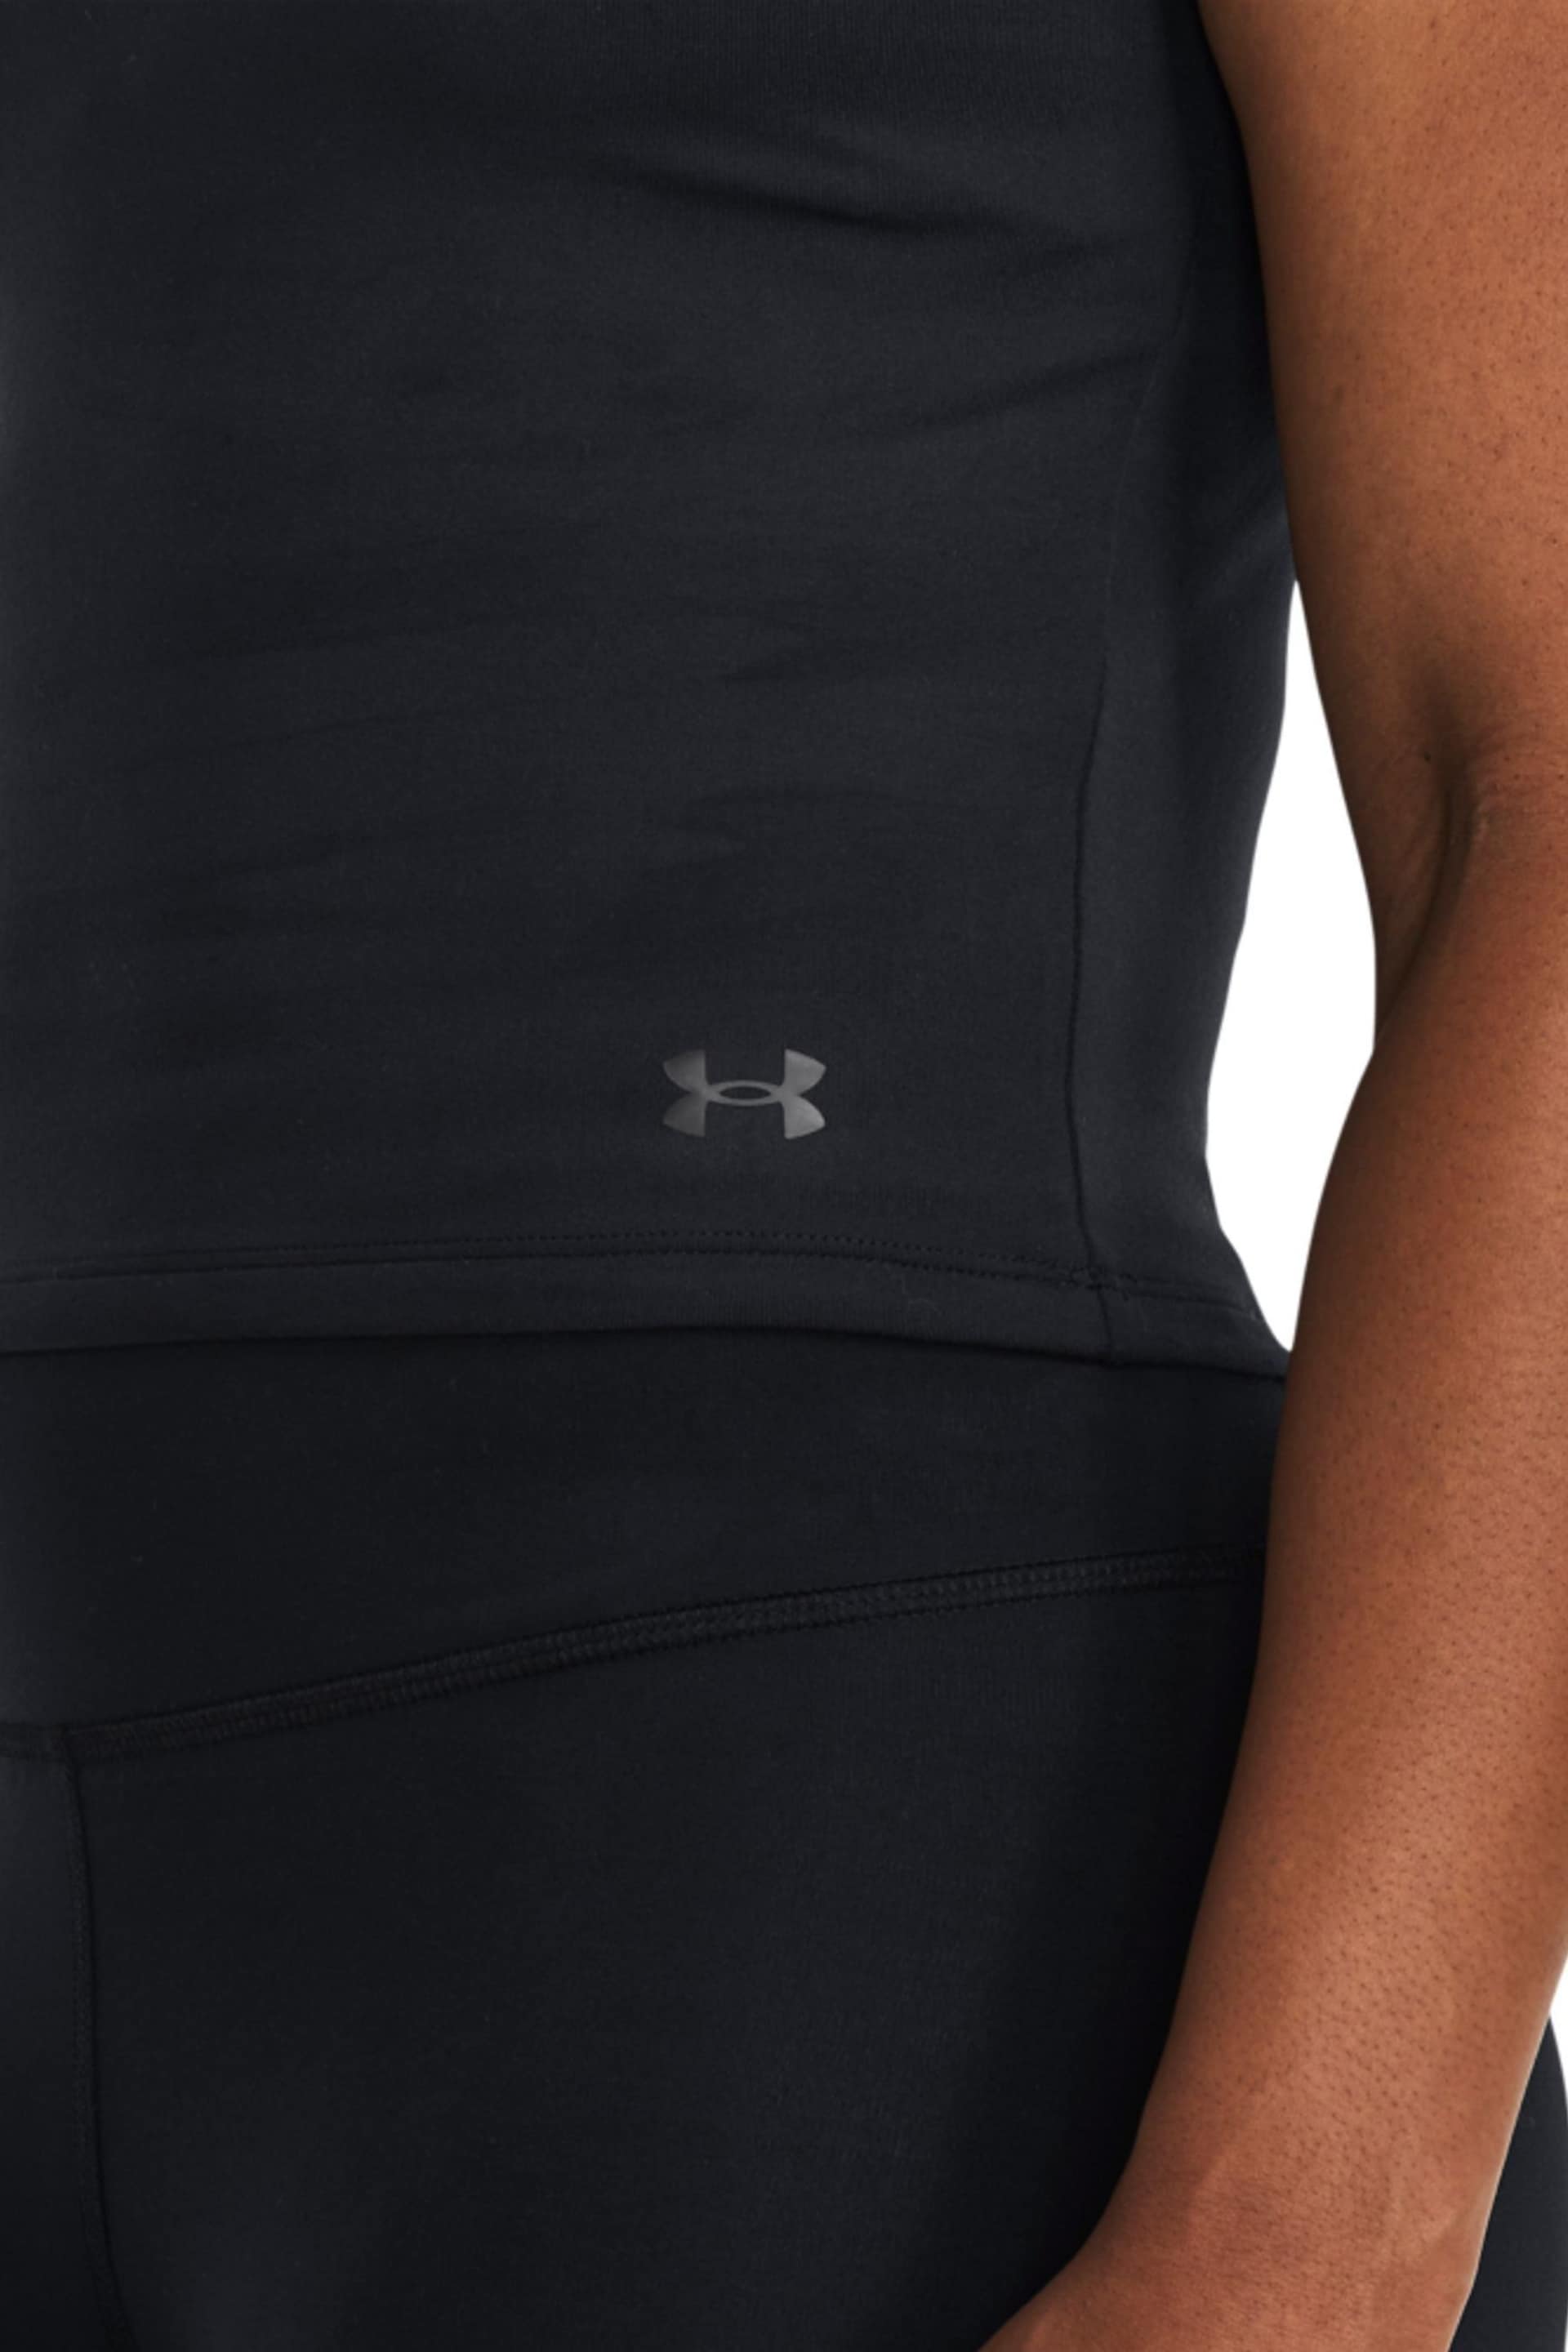 Under Armour Black Motion Crop Top - Image 6 of 6